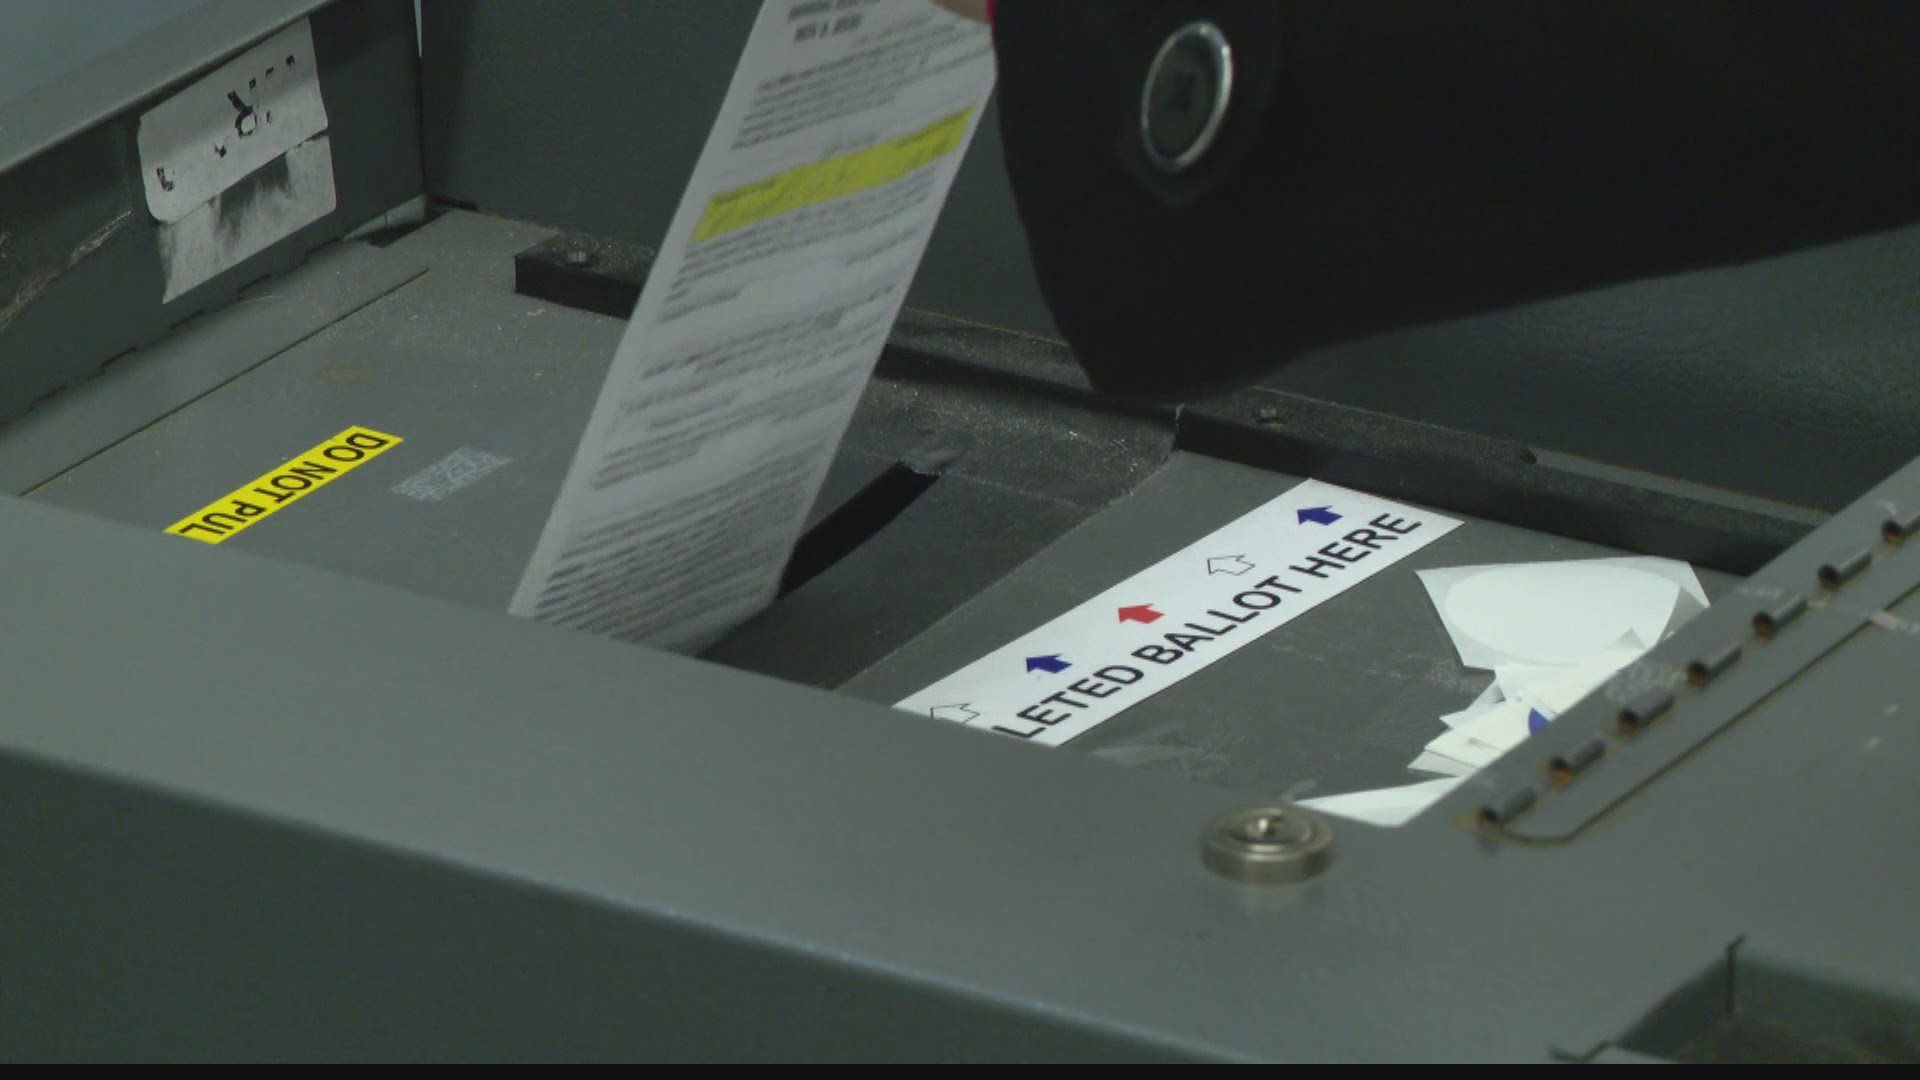 The locations are spread across Marion County, offering more flexibility for voters.